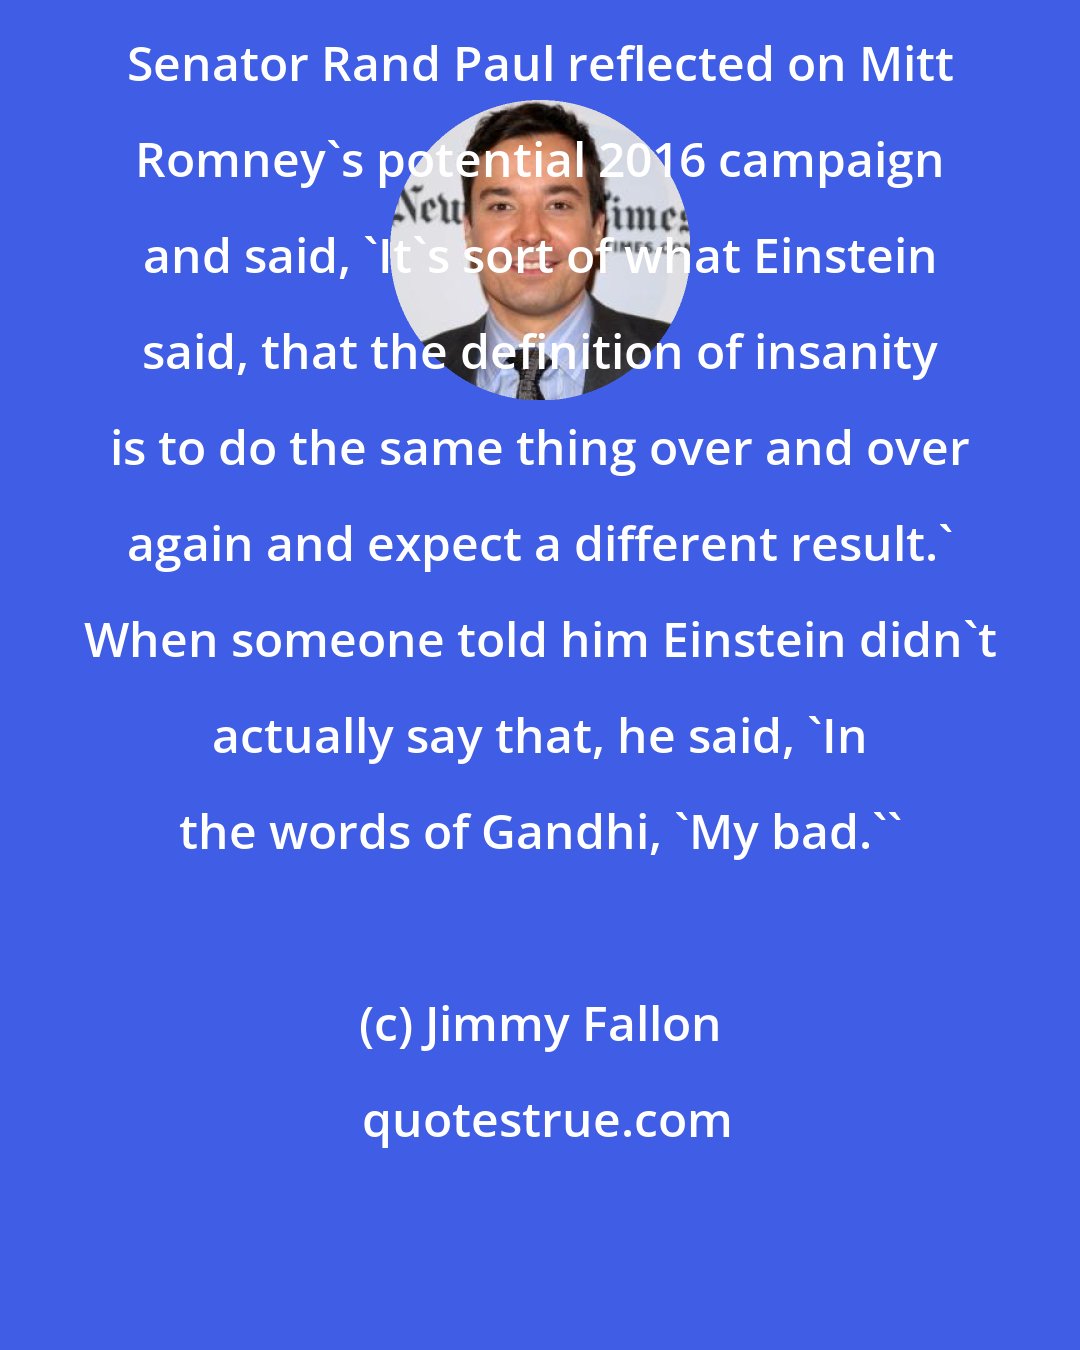 Jimmy Fallon: Senator Rand Paul reflected on Mitt Romney's potential 2016 campaign and said, 'It's sort of what Einstein said, that the definition of insanity is to do the same thing over and over again and expect a different result.' When someone told him Einstein didn't actually say that, he said, 'In the words of Gandhi, 'My bad.''